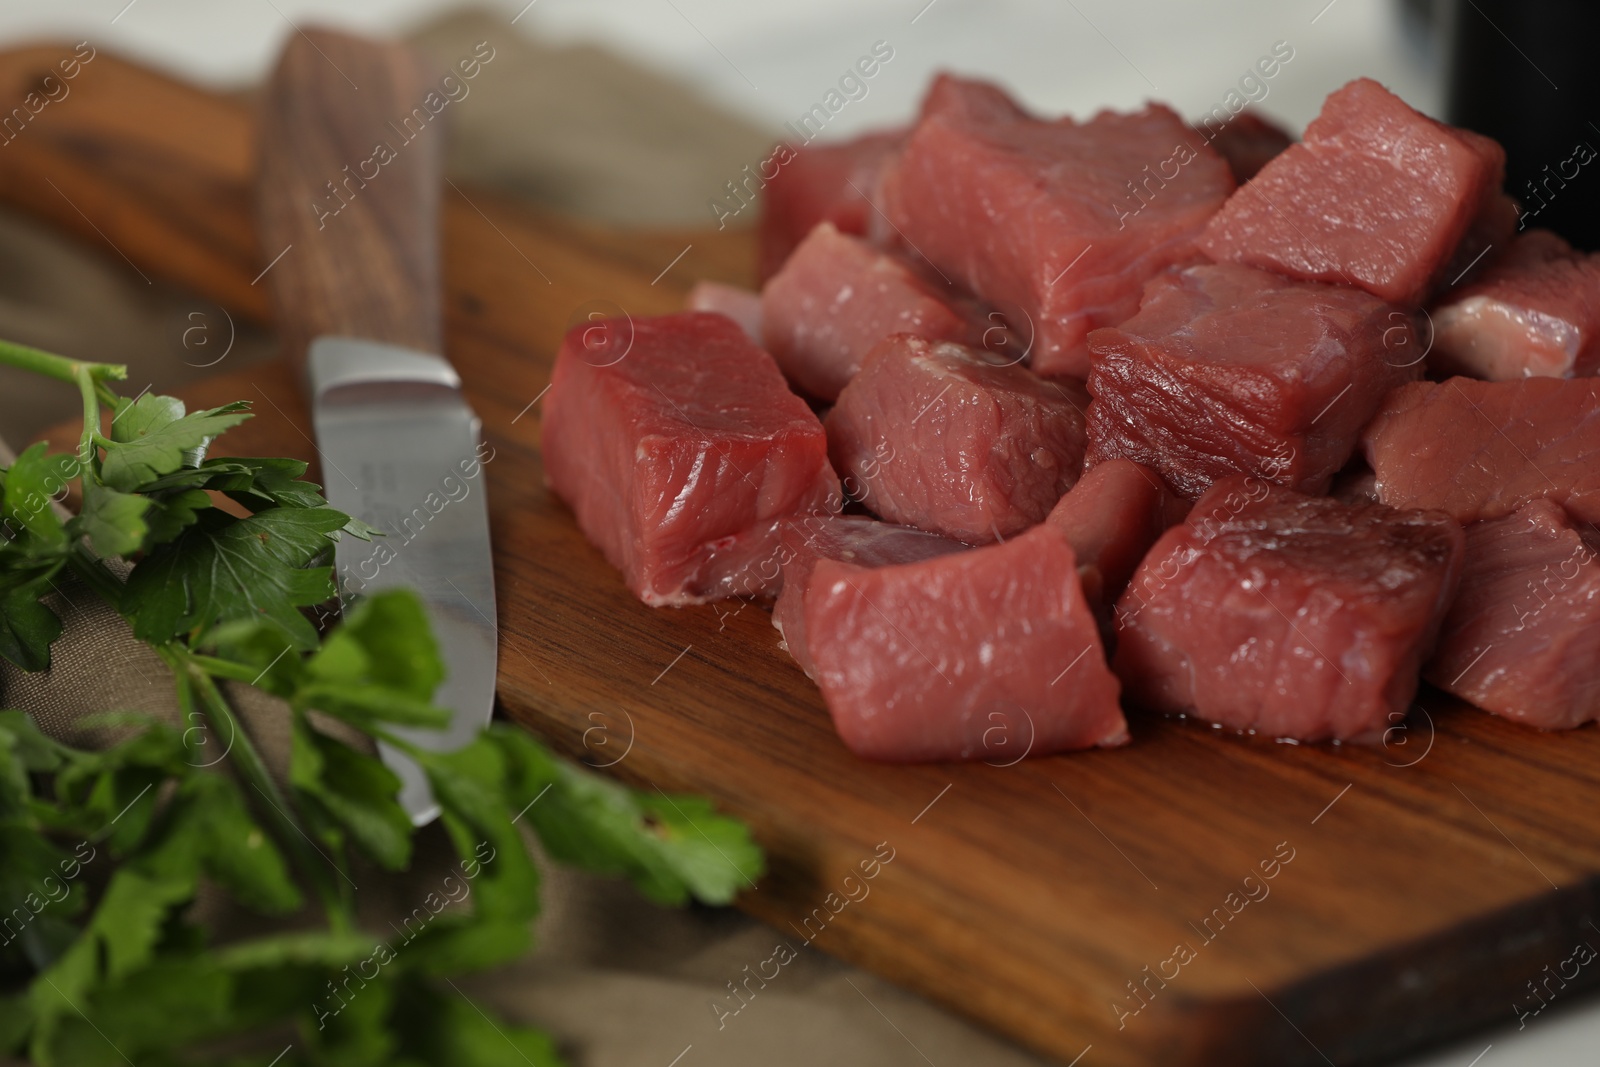 Photo of Pieces of raw beef and parsley on table, closeup